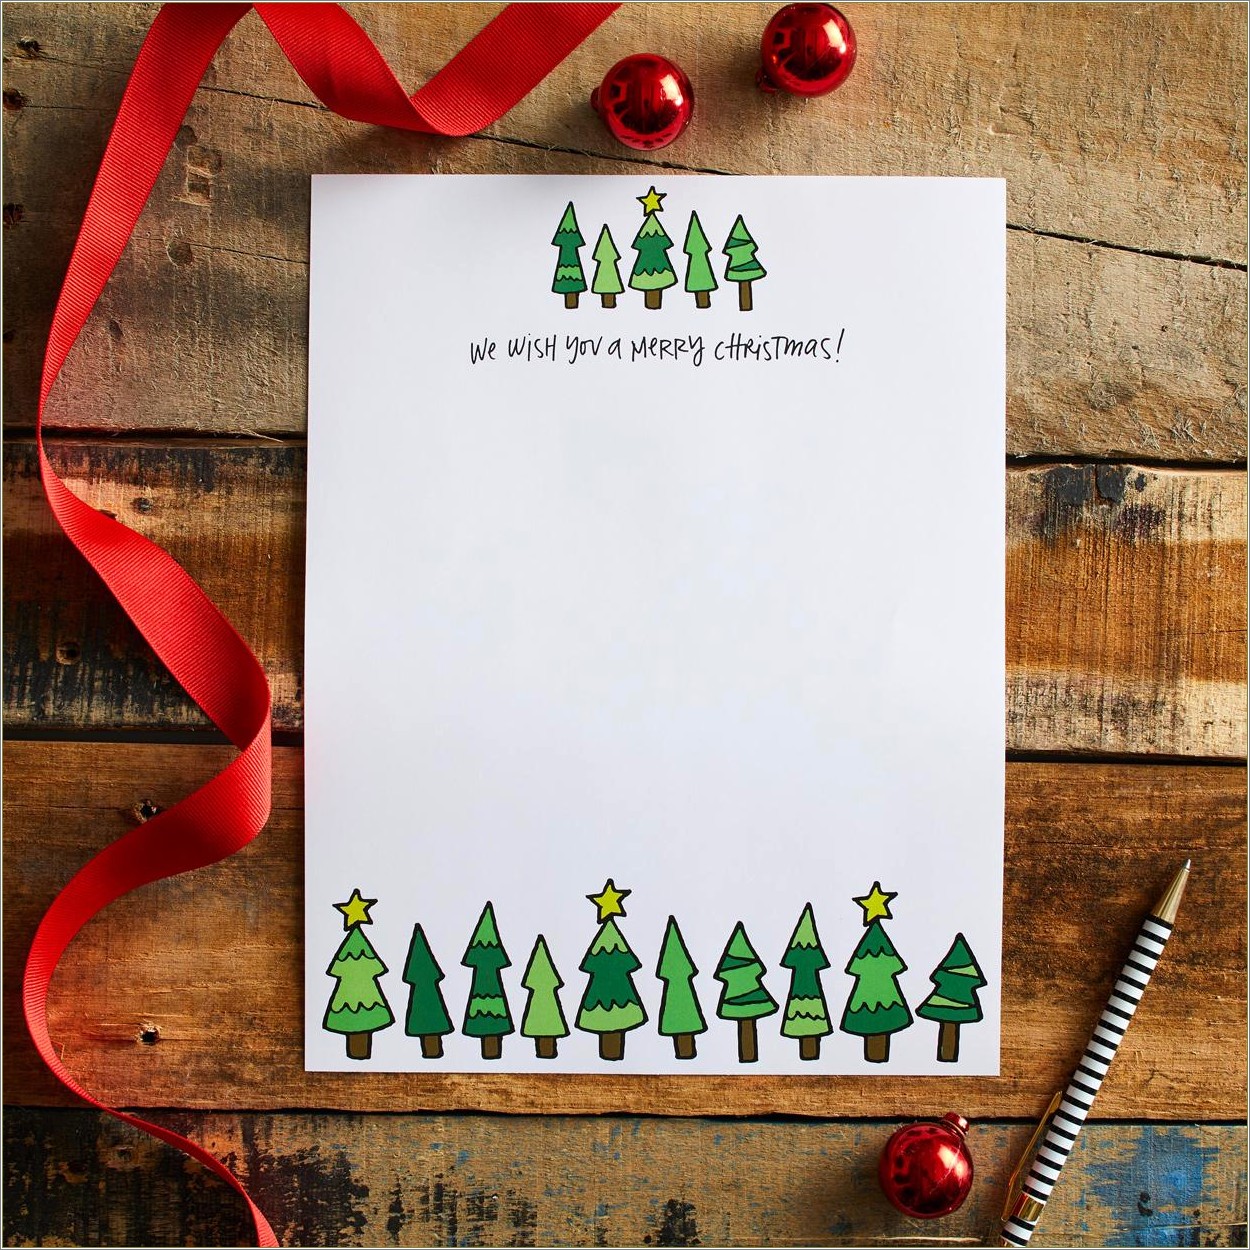 Christmas Letter Word Template 2010 Free